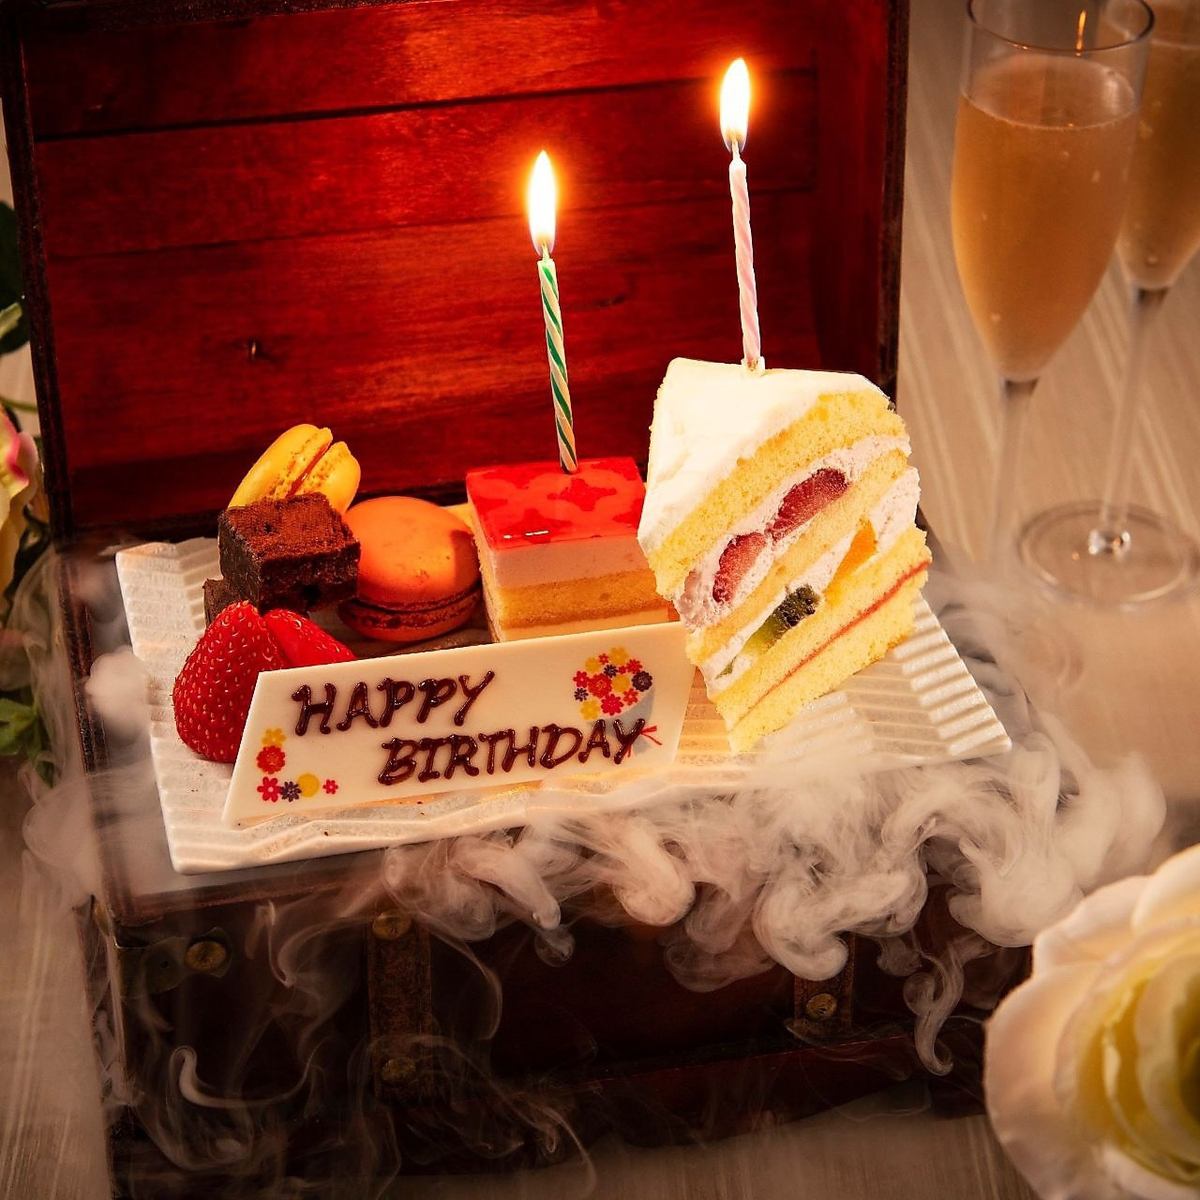 Cake free service on birthdays and anniversaries ♪ There is a treasure chest plate with direction